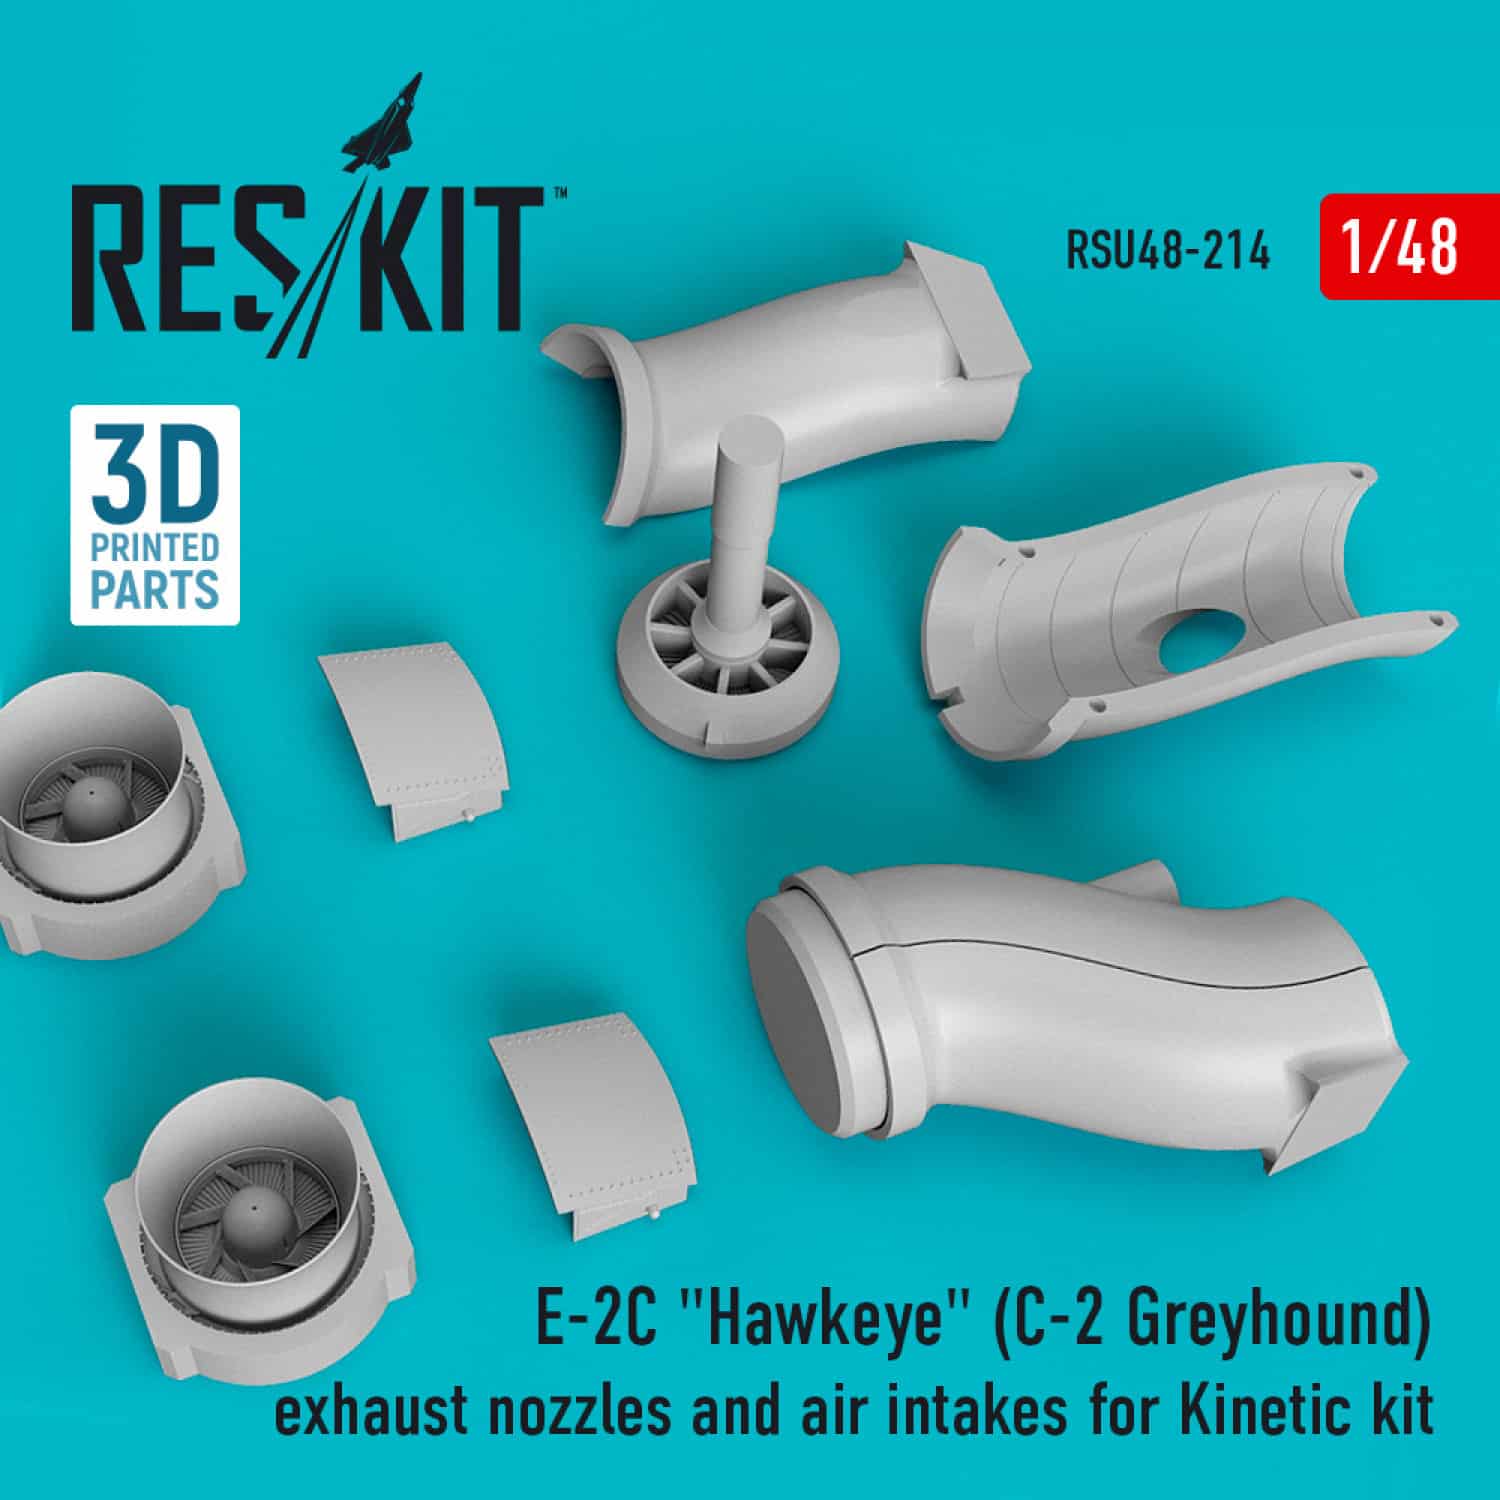 Reskit 148 E-2C Hawkeye C-2 Greyhound) exhaust nozzles and air intakes for Kinetic kit 3D Printing